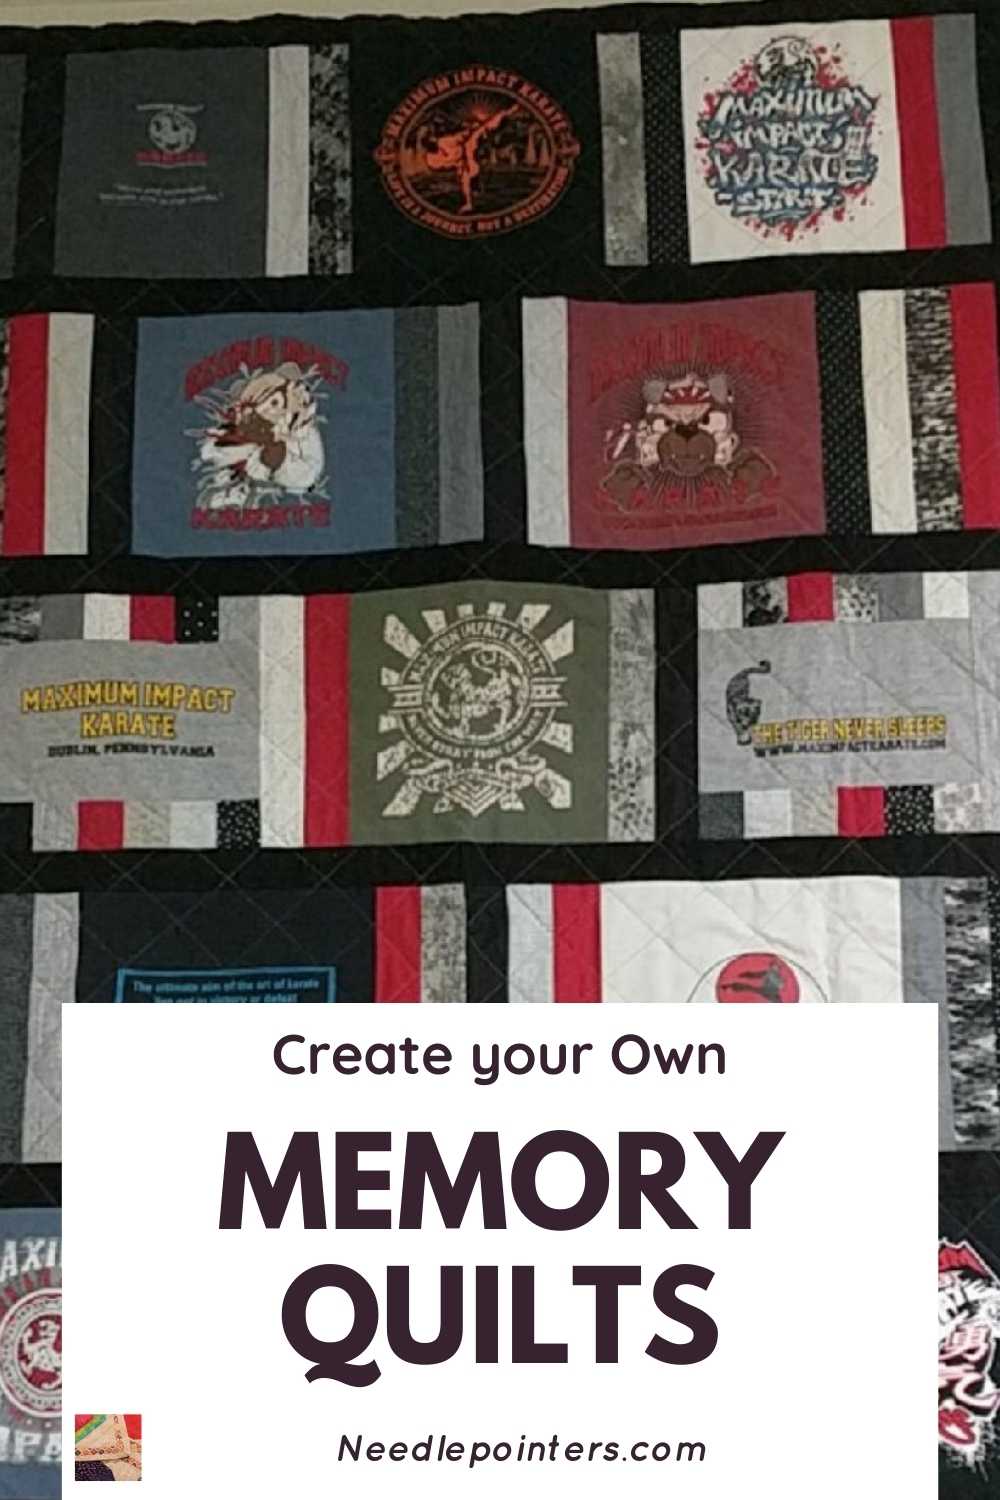 Memory Quilts: Wrap Up In A Warm Blanket of Memories